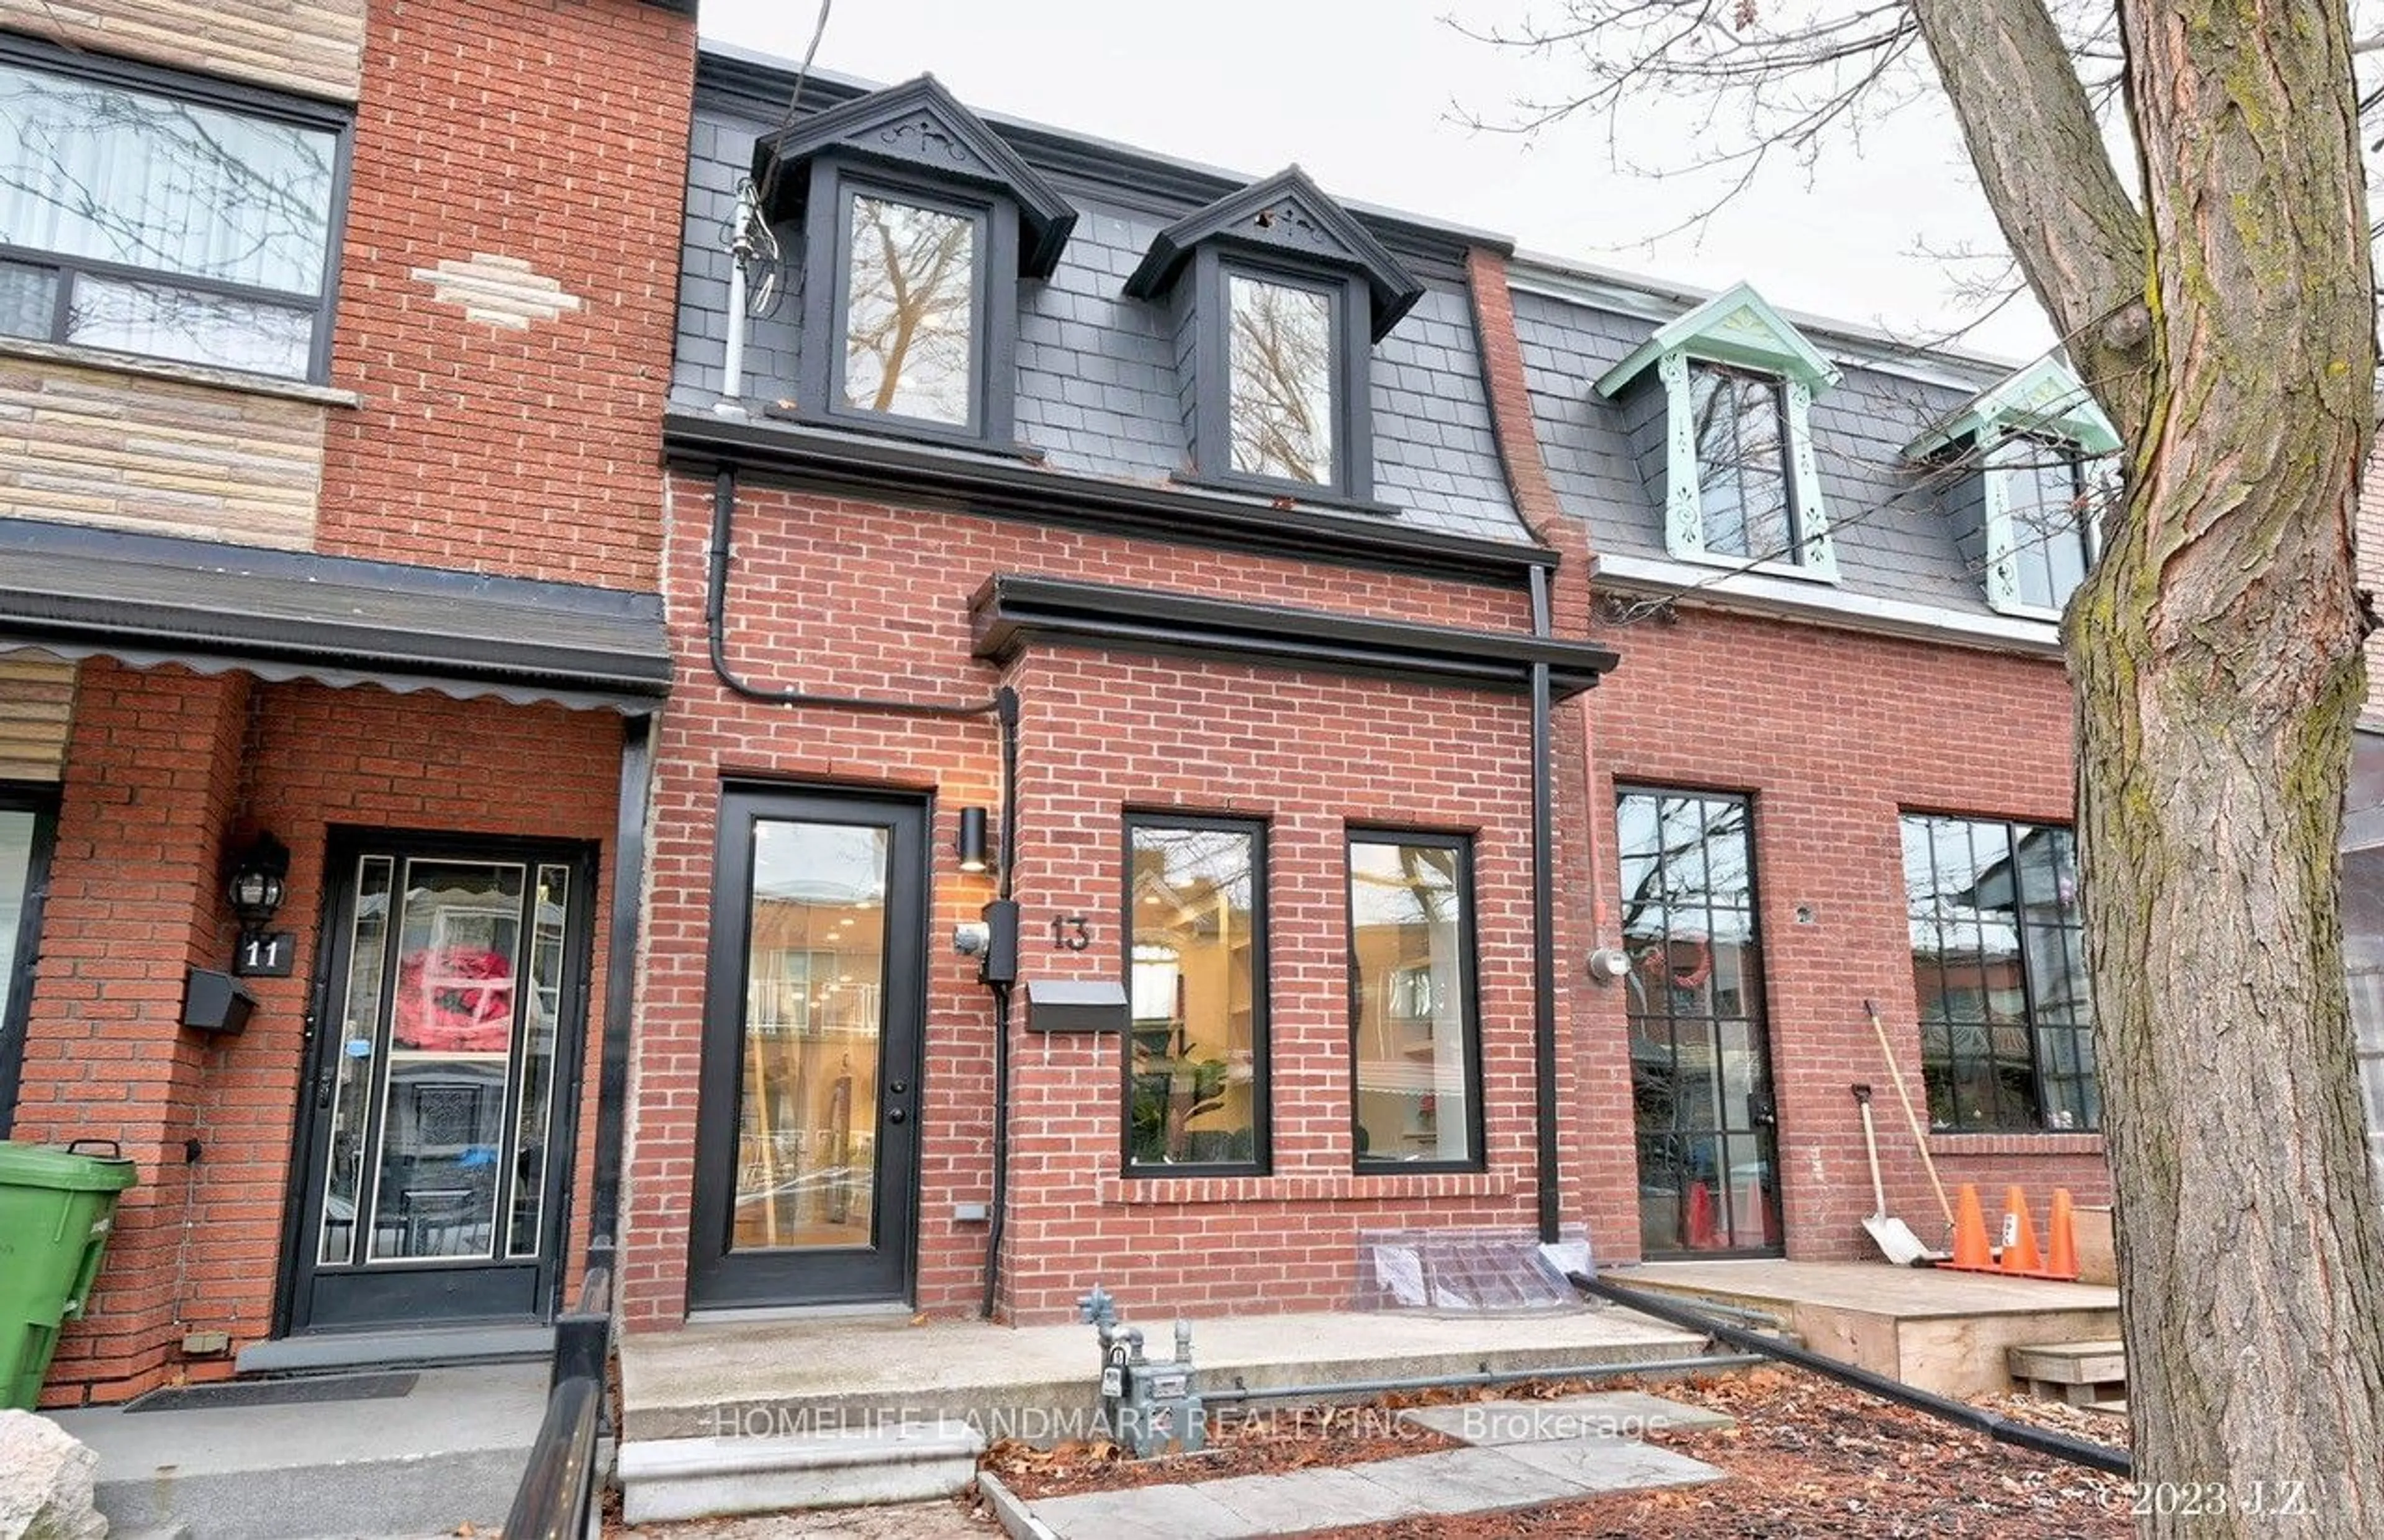 Home with brick exterior material for 13 ALMA Ave, Toronto Ontario M6J 1N2